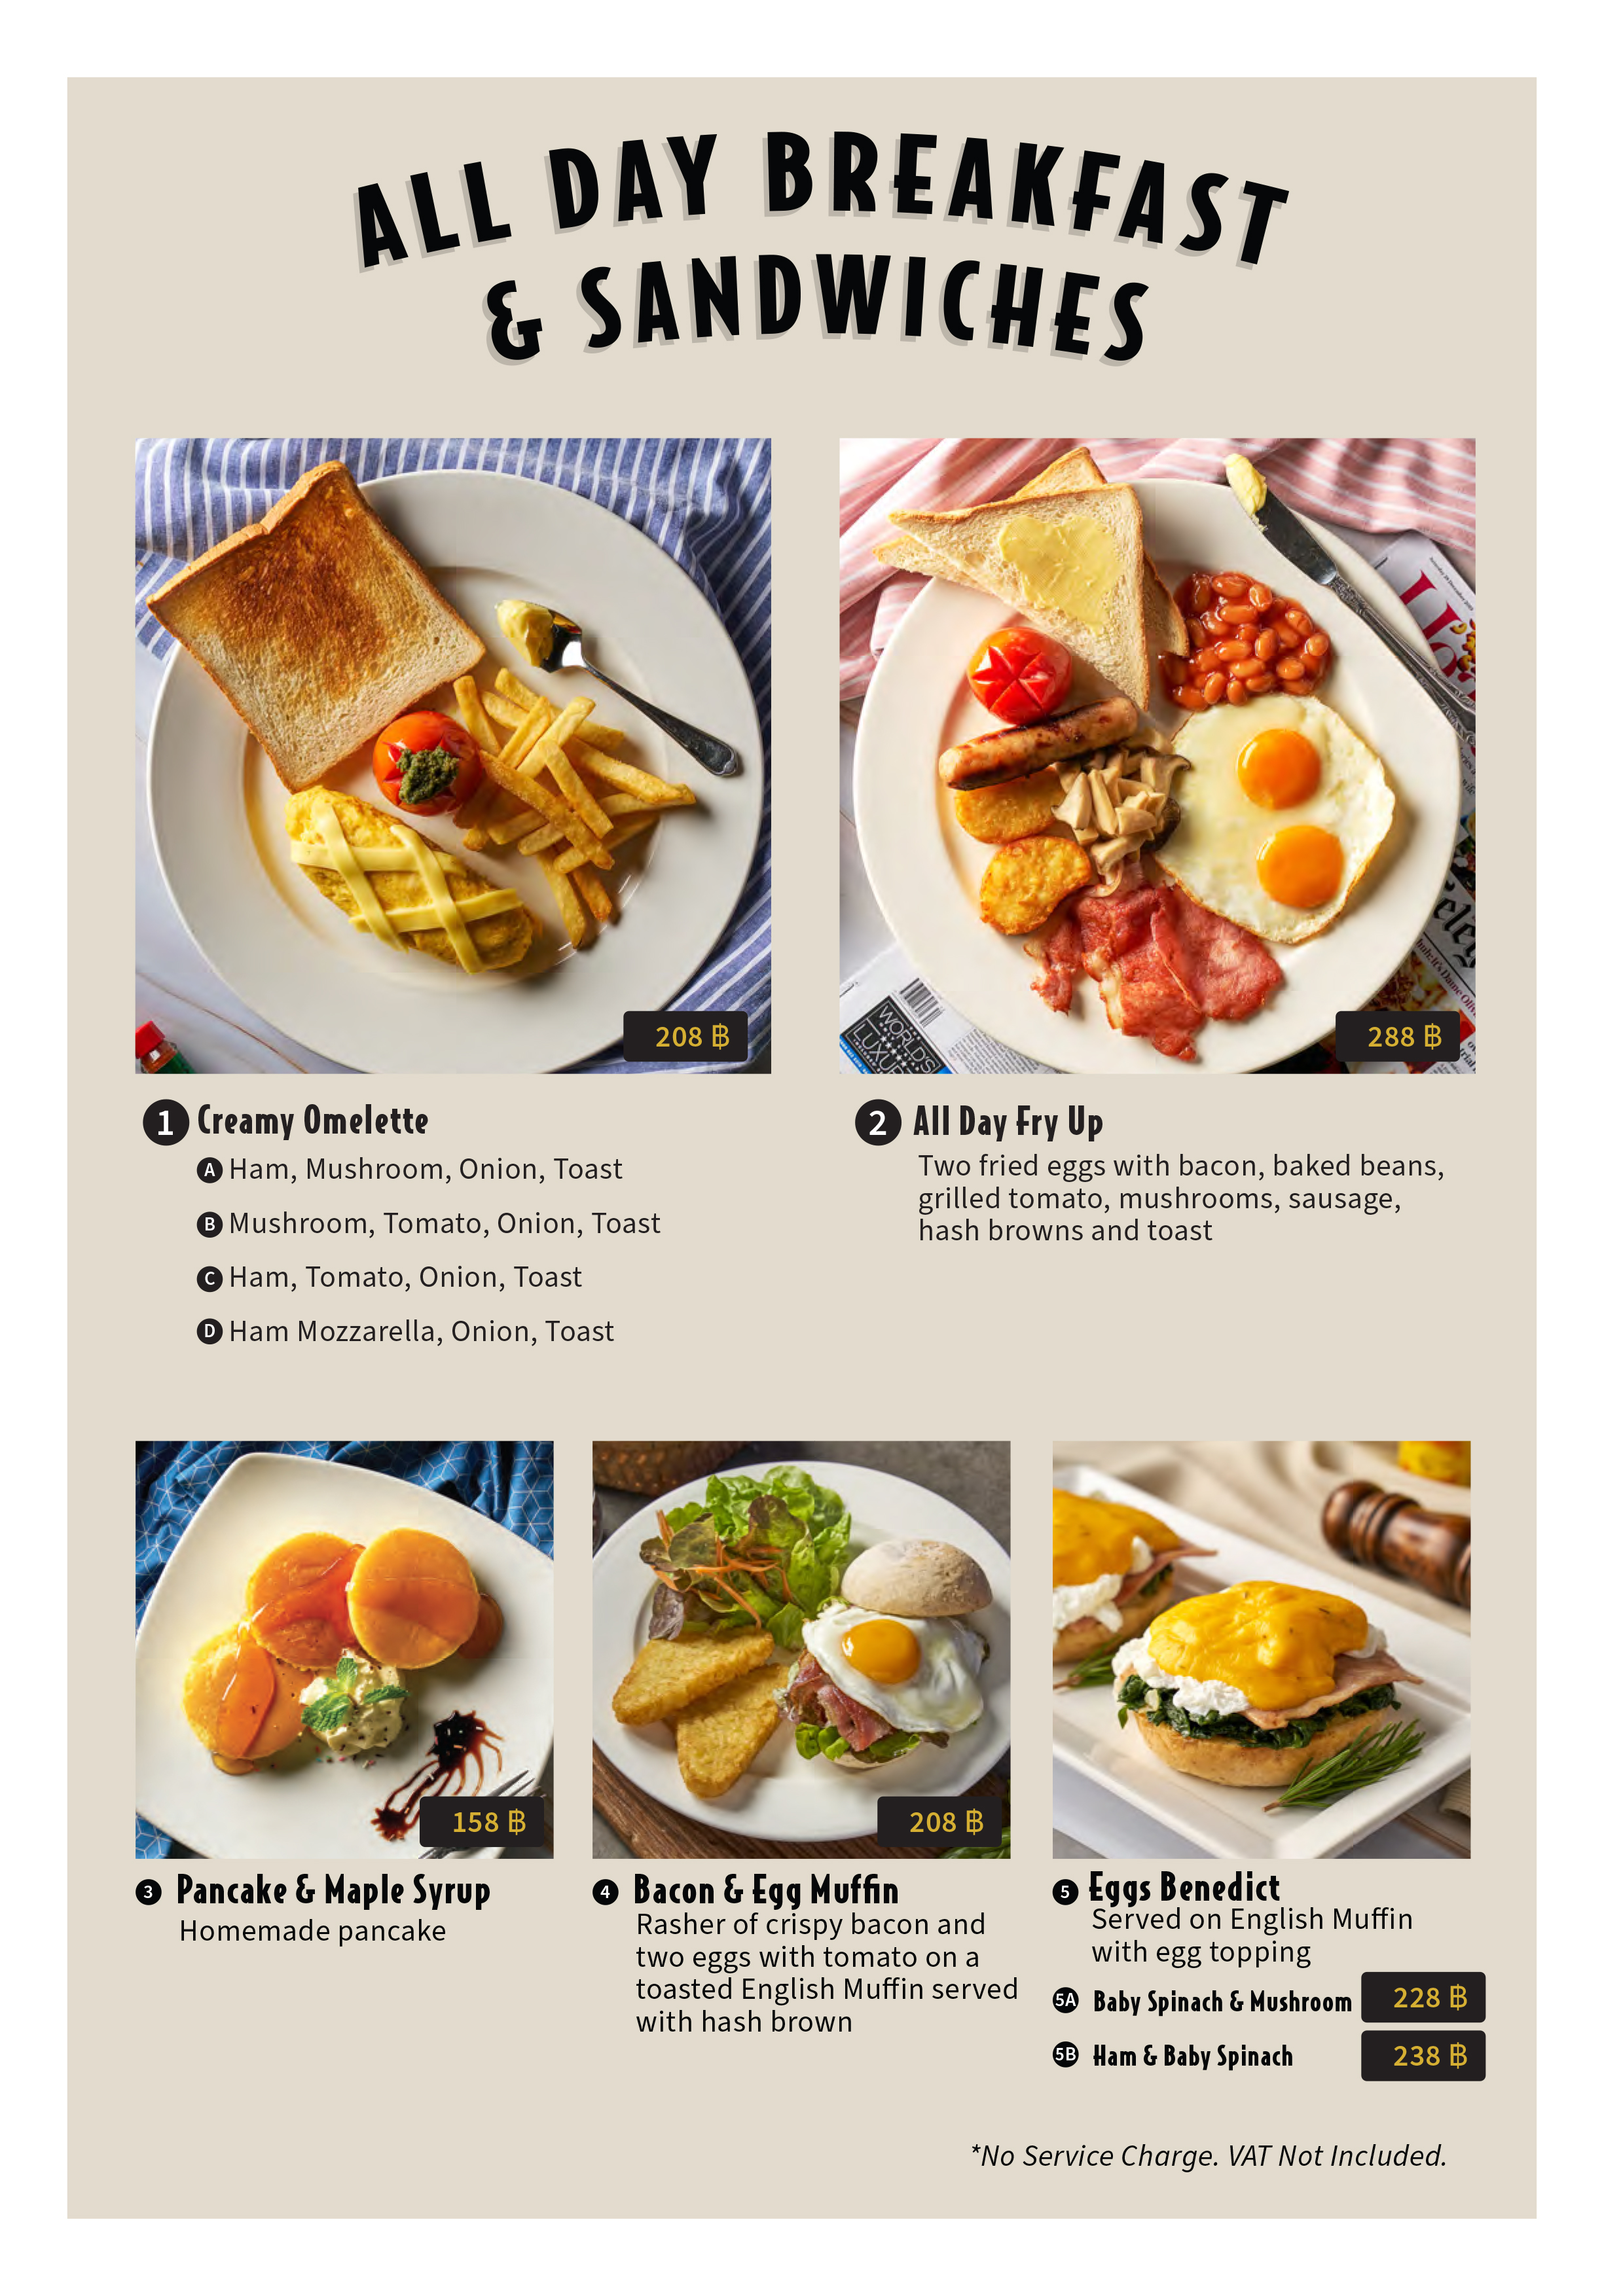 A4 Mullis Menu Layout 1_Cover and Breakfast LR